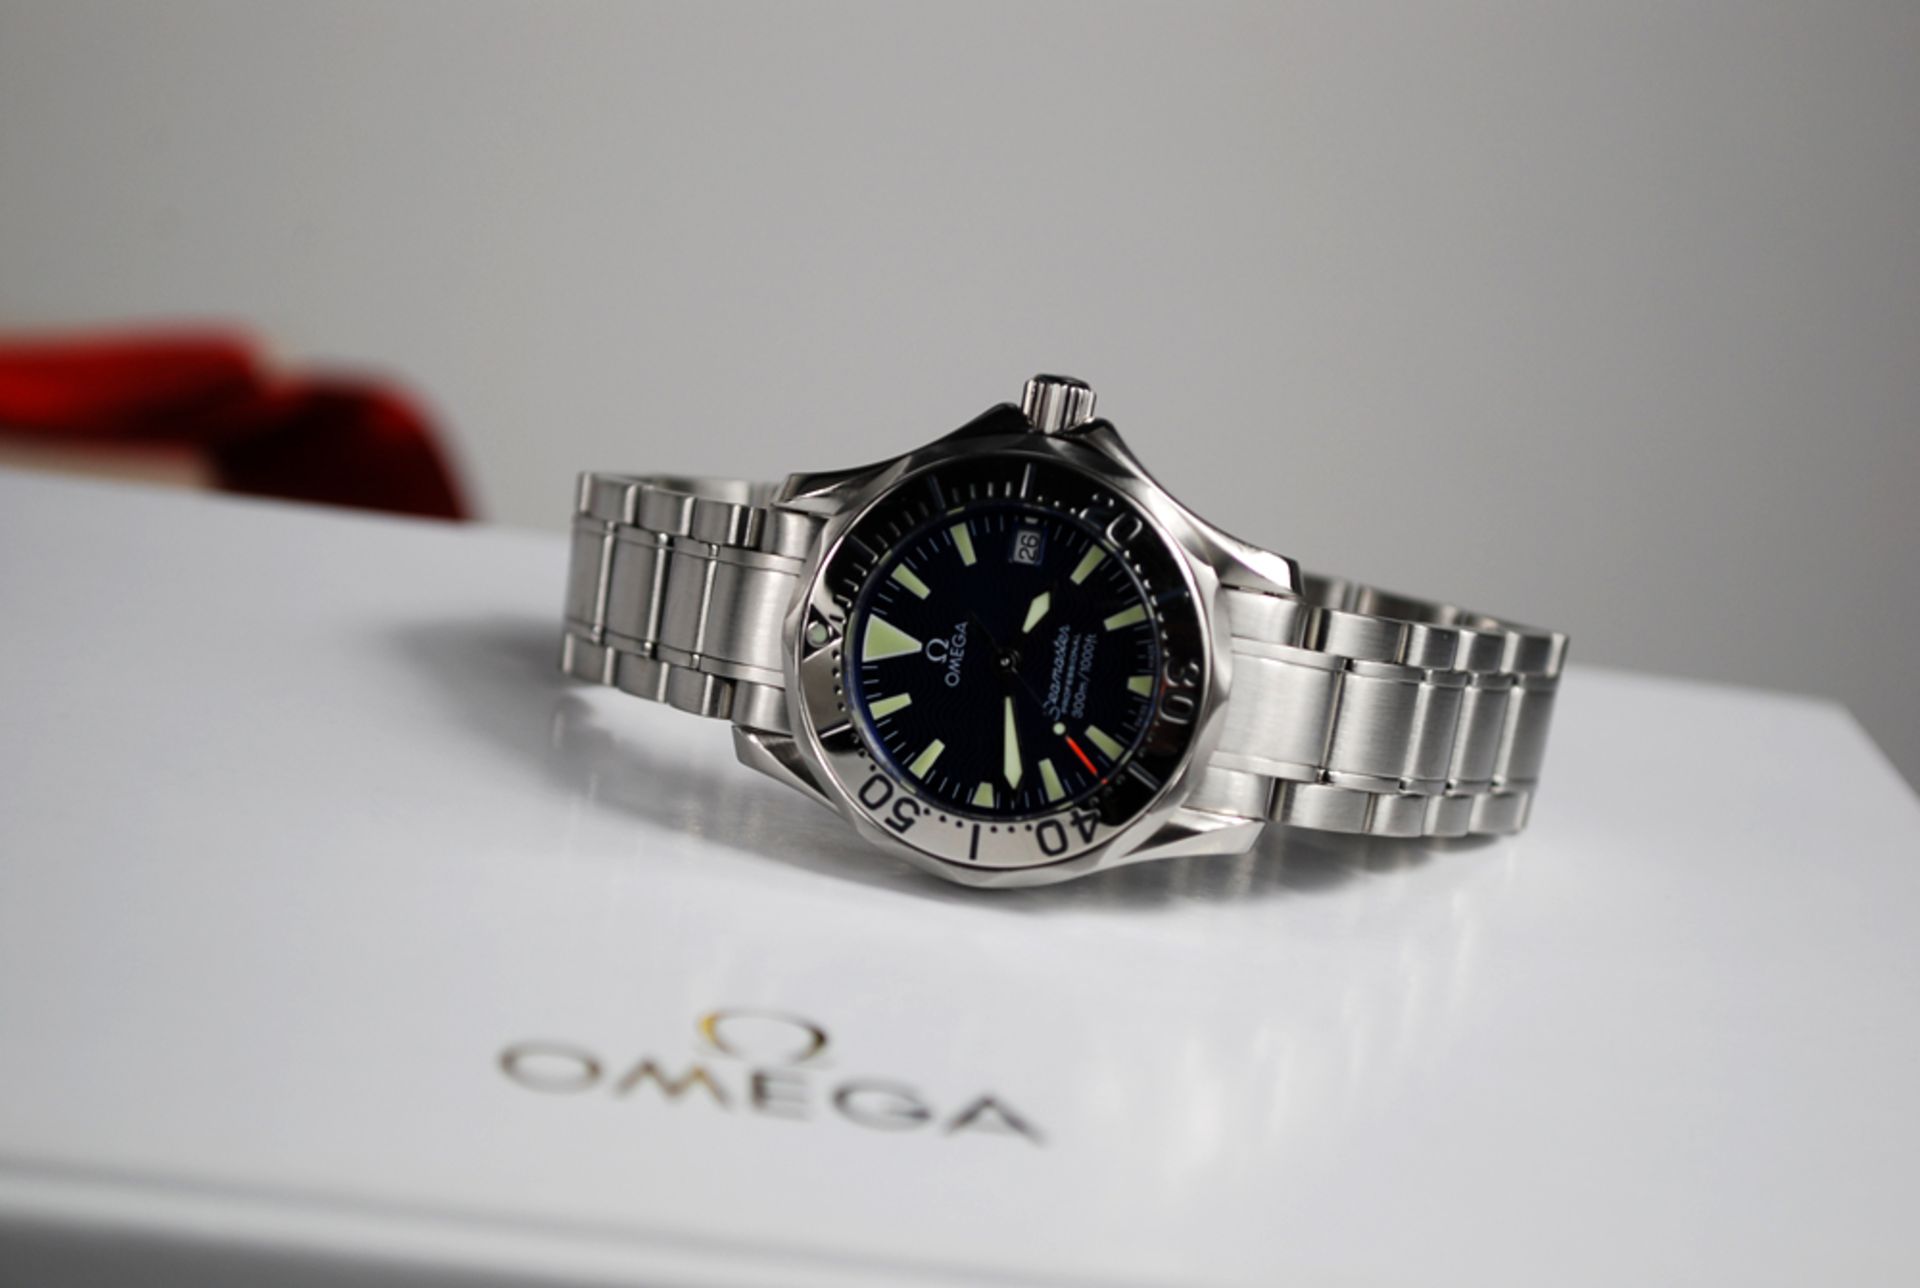 OMEGA SEAMASTER (Ladies) – '2285.80.00' Stainless Steel   Fantastic Watch - Condition: see imagery - Image 12 of 12